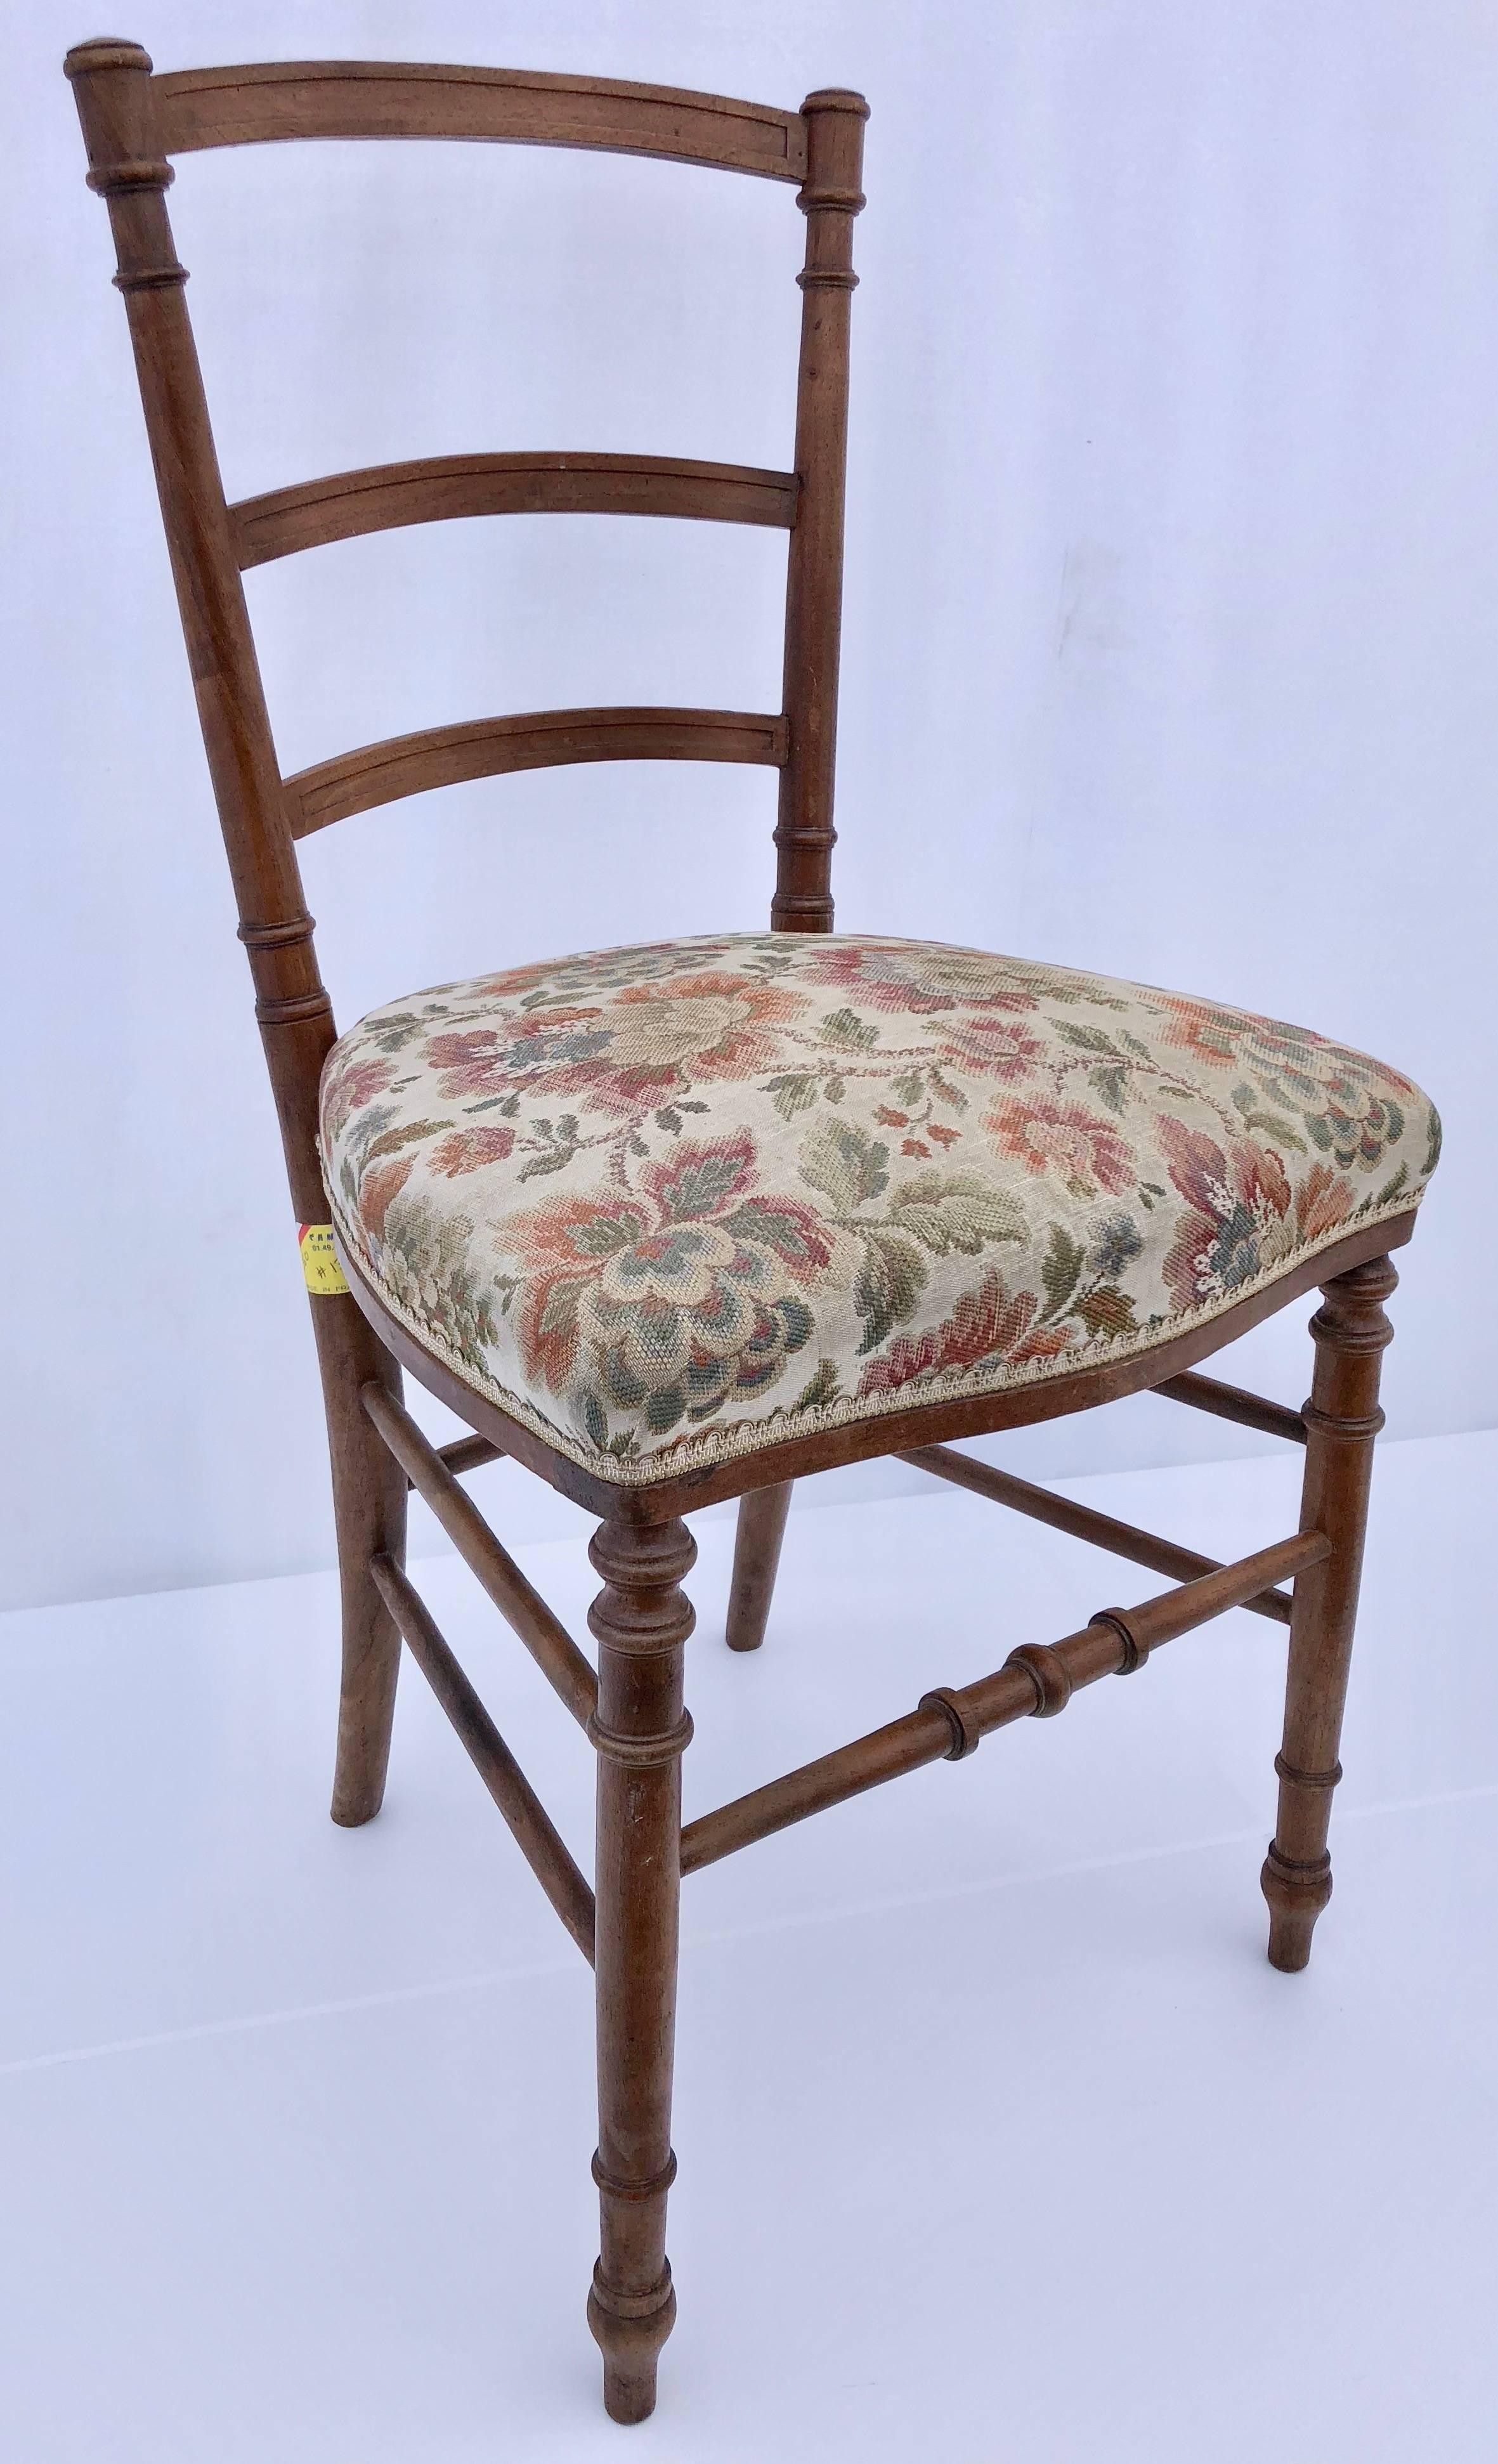 These two Napoleon III chairs are simply beautiful. One is natural wood with a an antique floral upholstery and trim, with a slightly wider seat and the other is black hand painted wood with an off-white and pale grey upholstery in a floral design